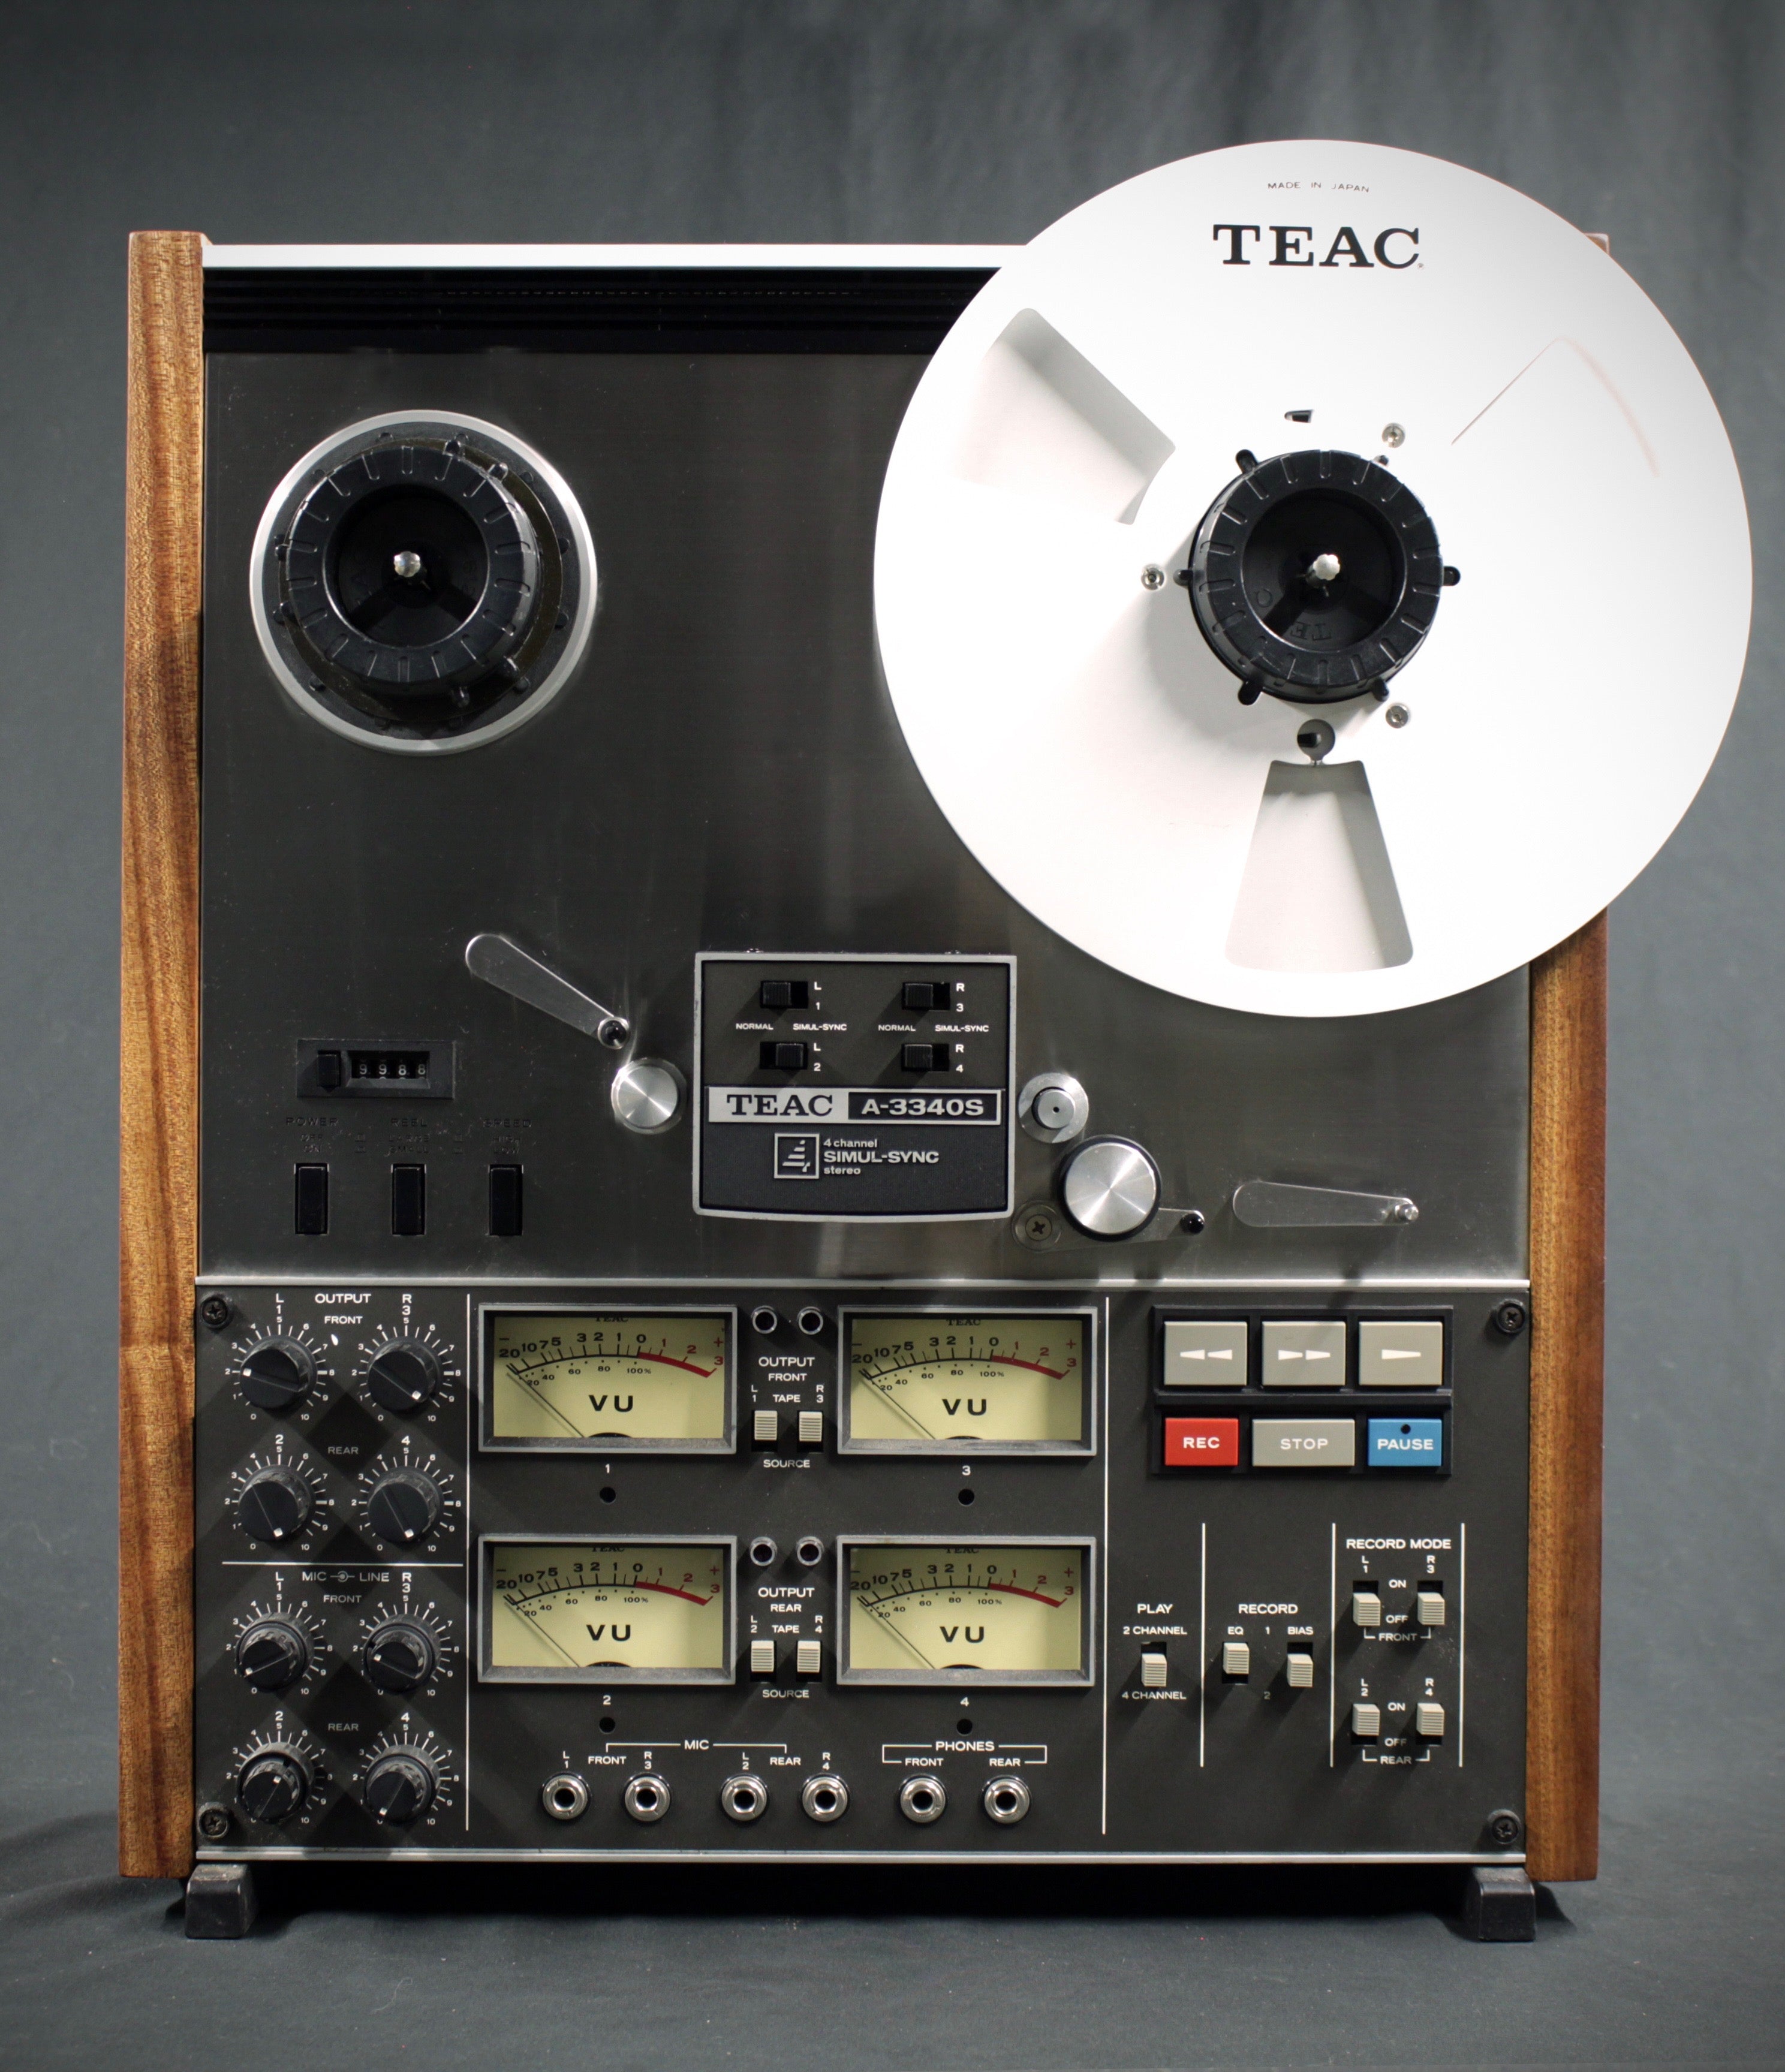 TEAC TZ-440 Smoked Plastic Reel To Reel DUST COVER 3340 3440 a3340s ULTRA  RARE!! Photo #3057618 - US Audio Mart